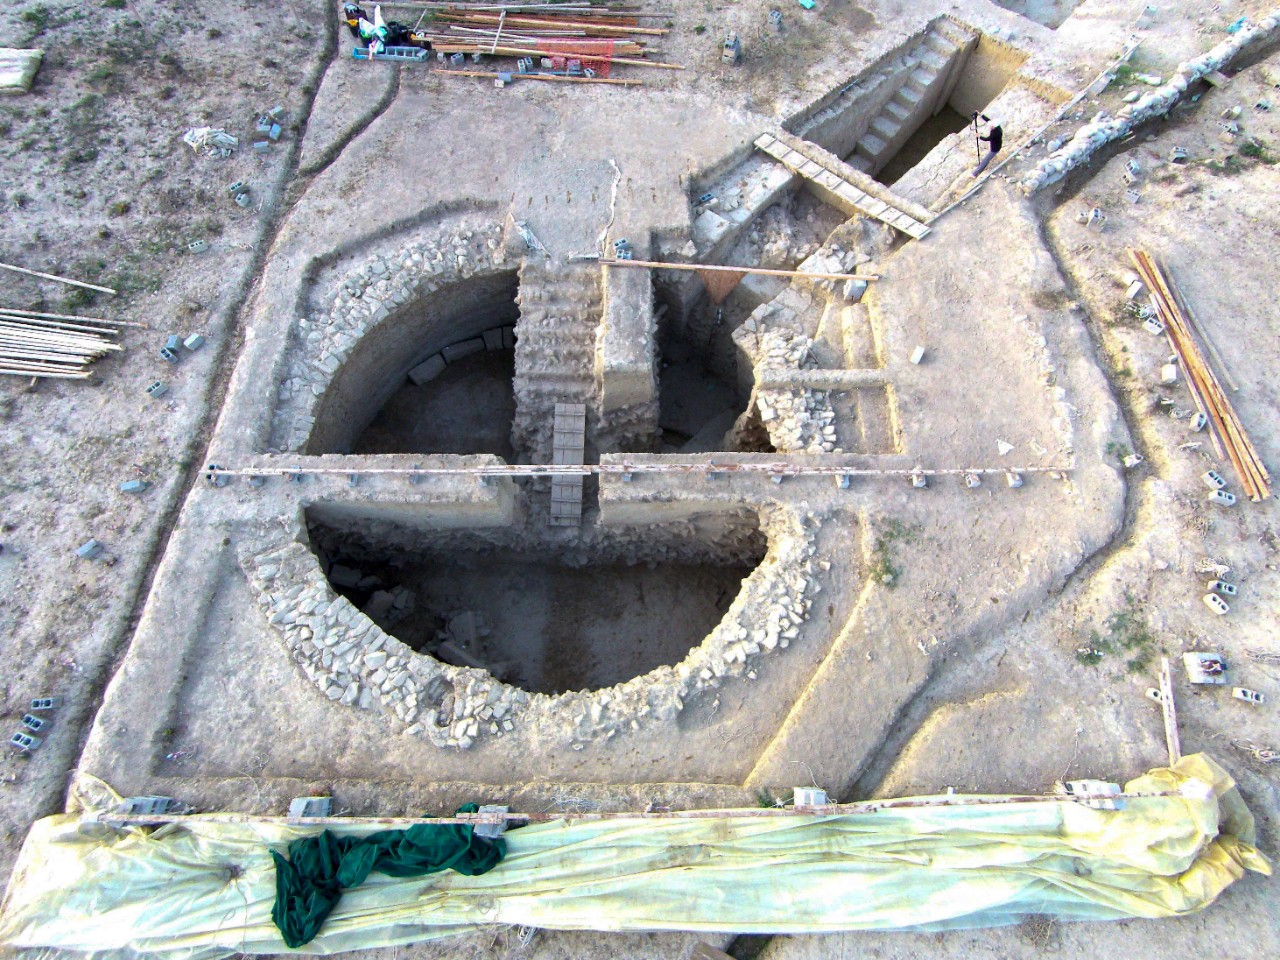 An aerial view of a family tomb unearthed by UC archaeologists Sharon Stocker and Jack Davis.